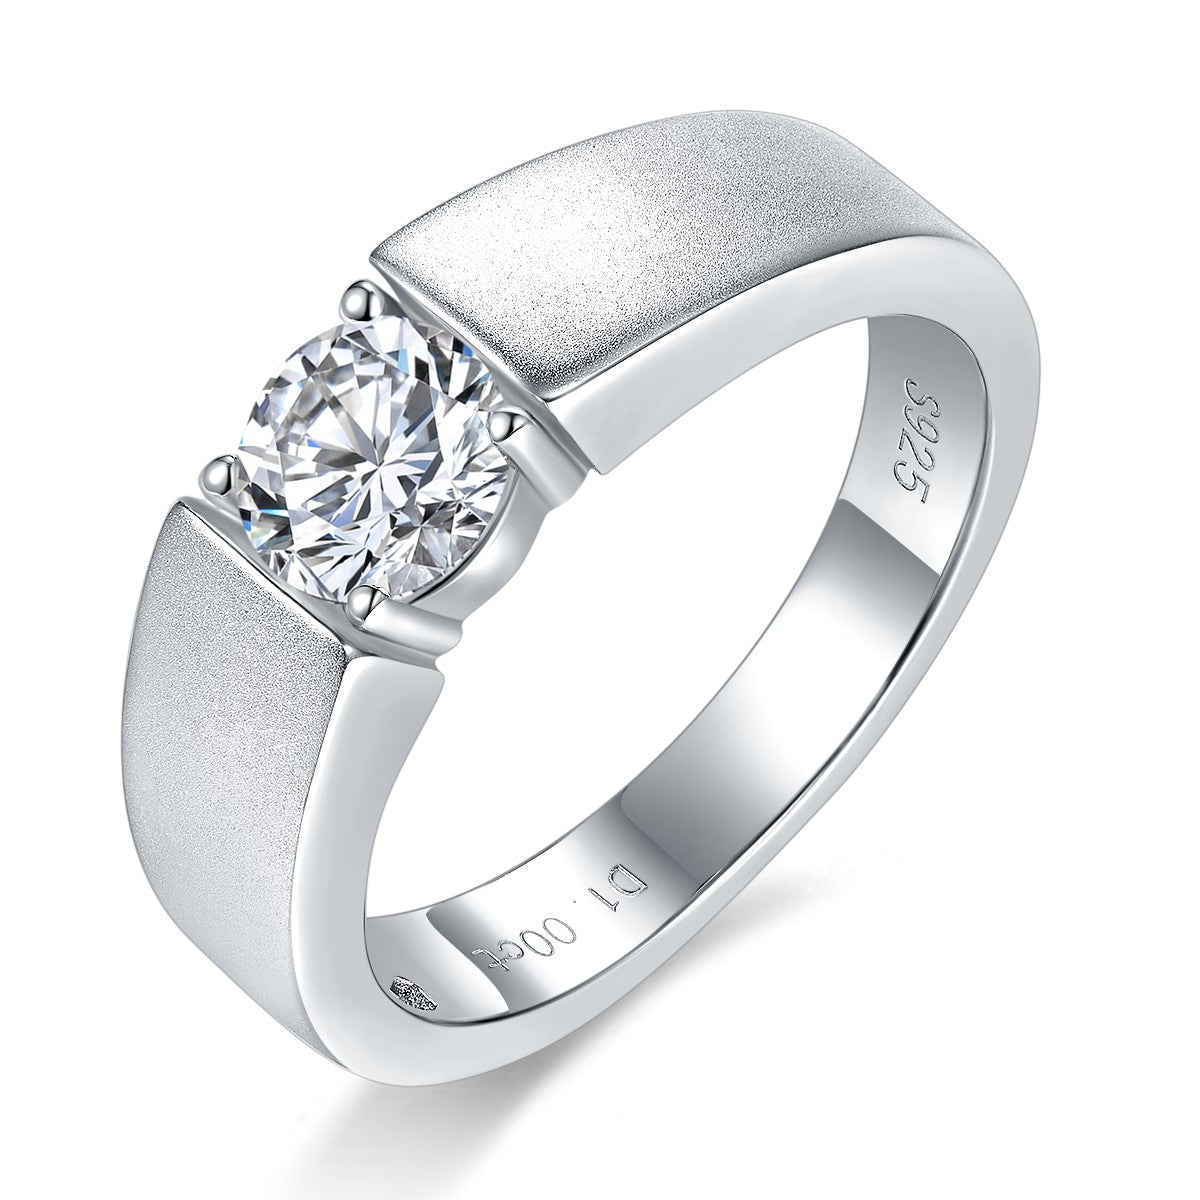 IE0065 6.5MM MOISSANITE SIGNET RING IN STERLING SILVER